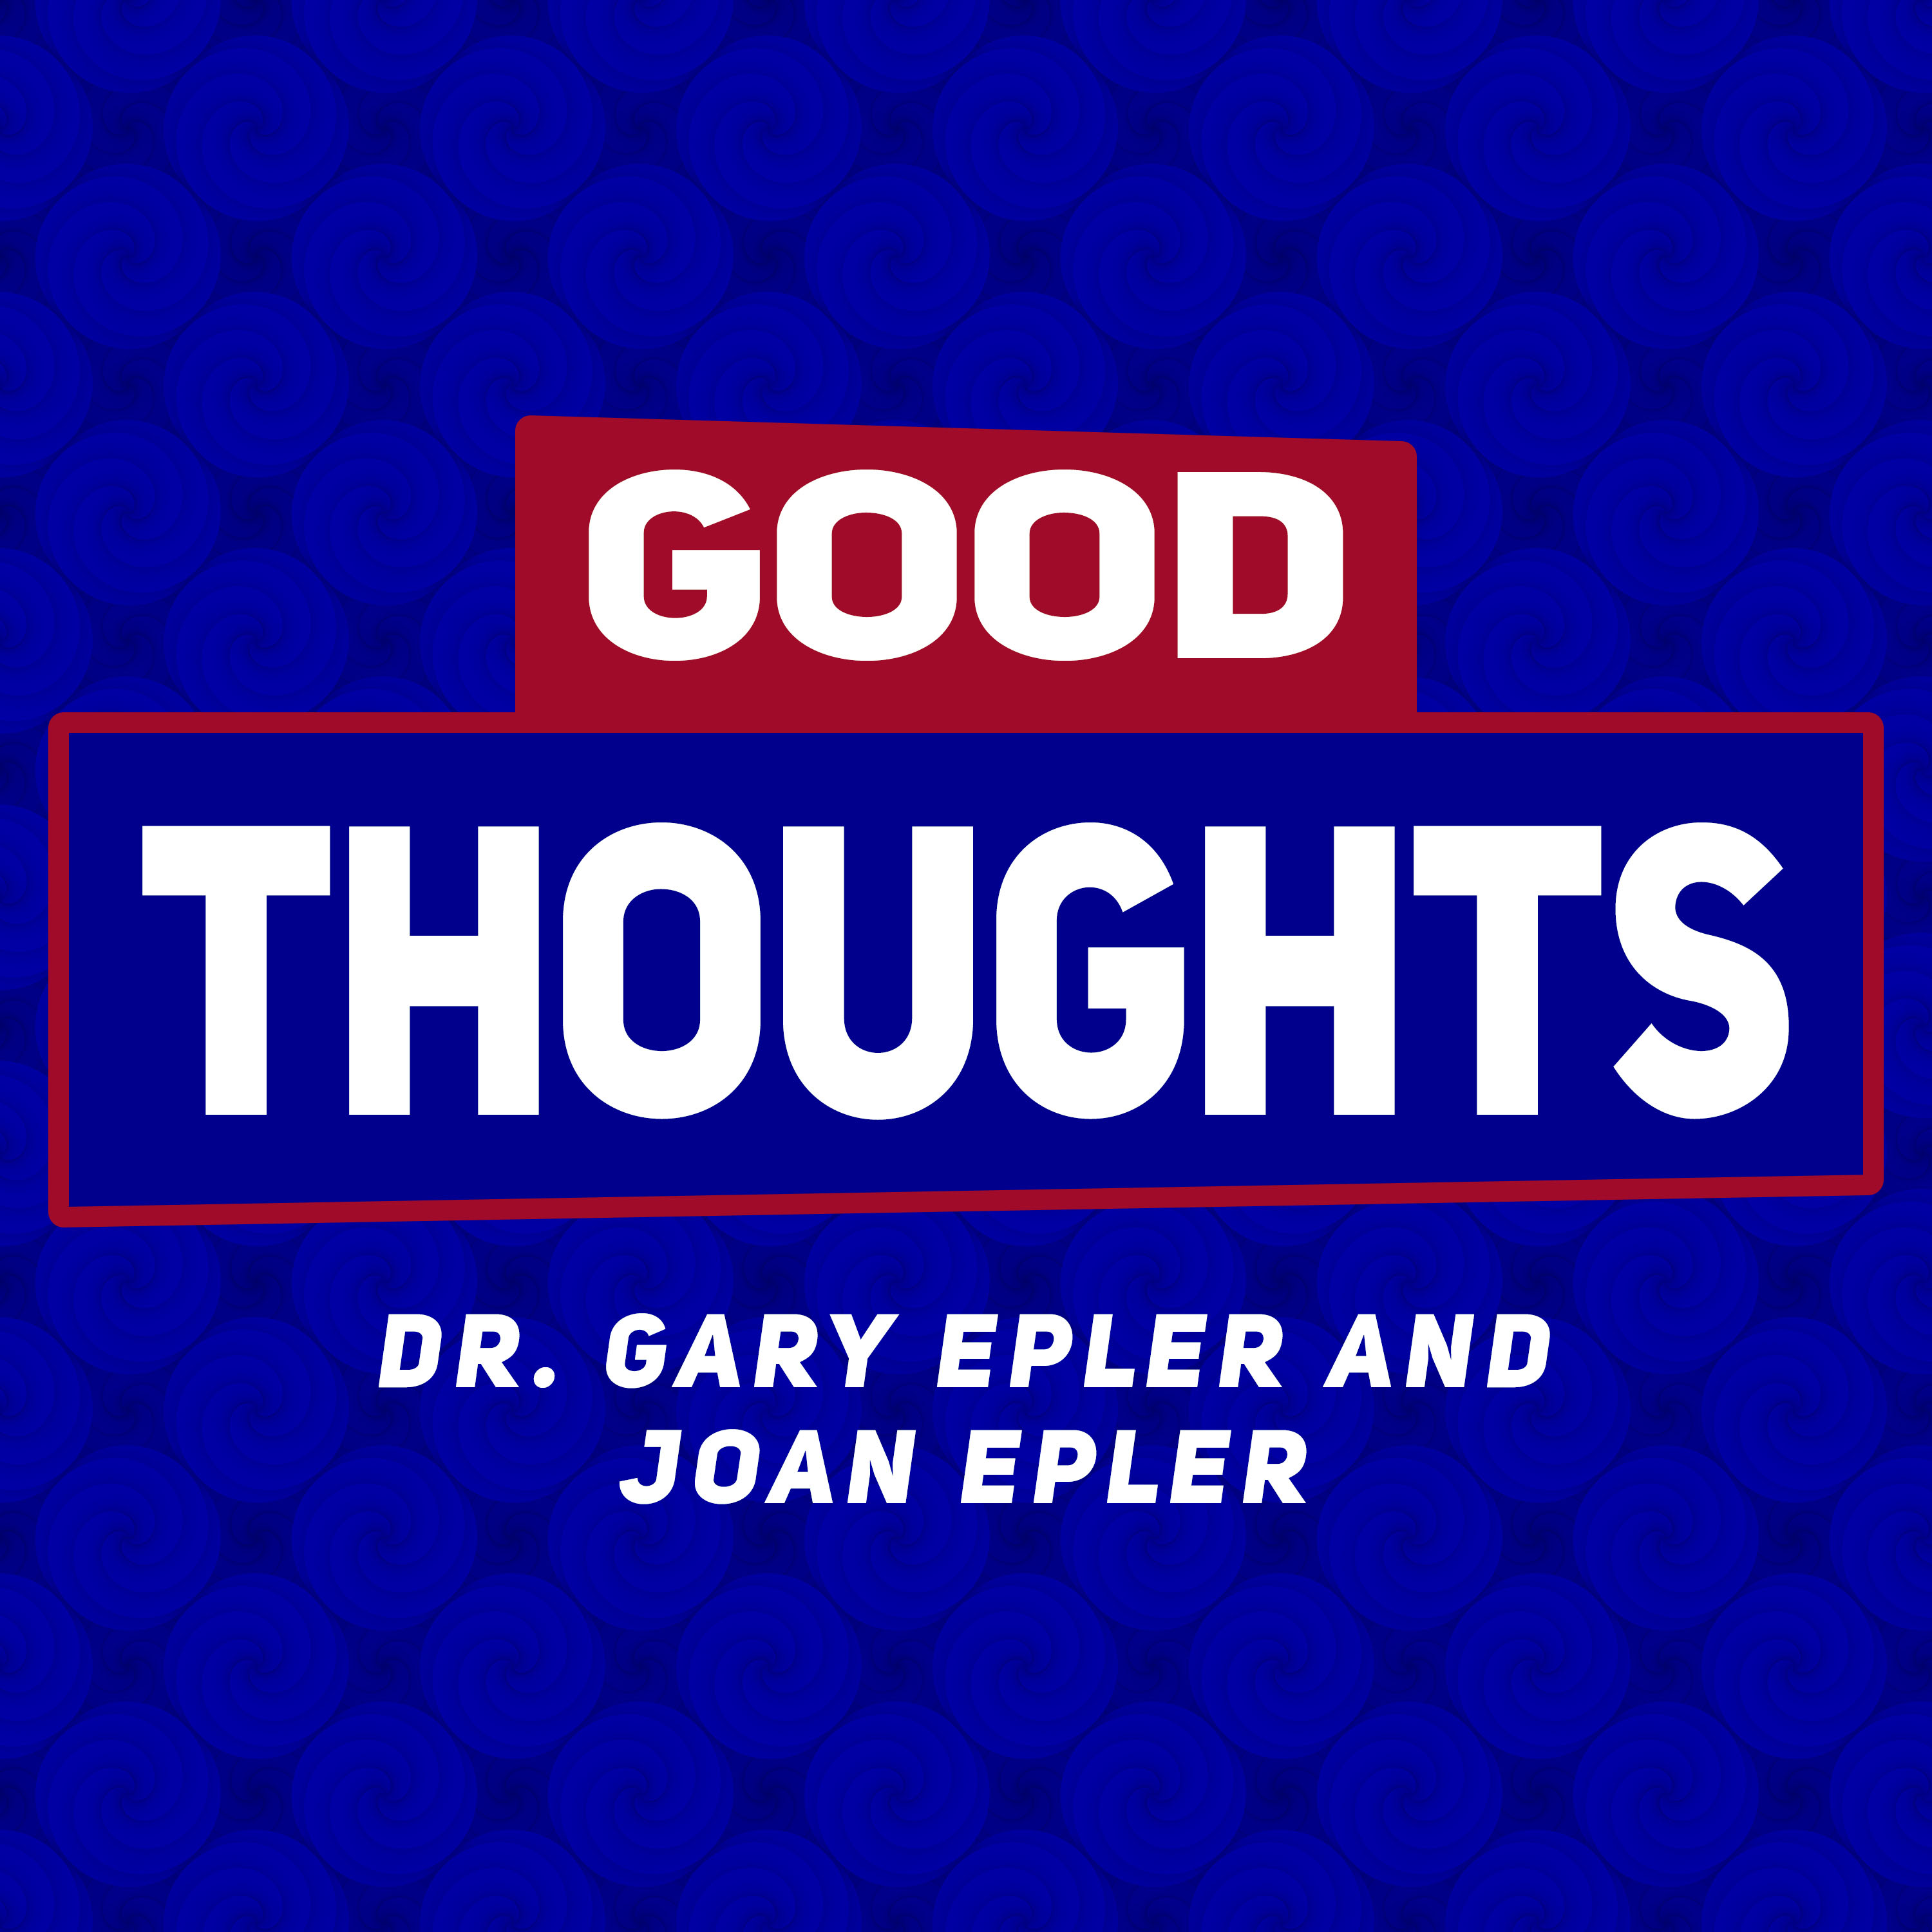 Artwork for podcast Good Thoughts